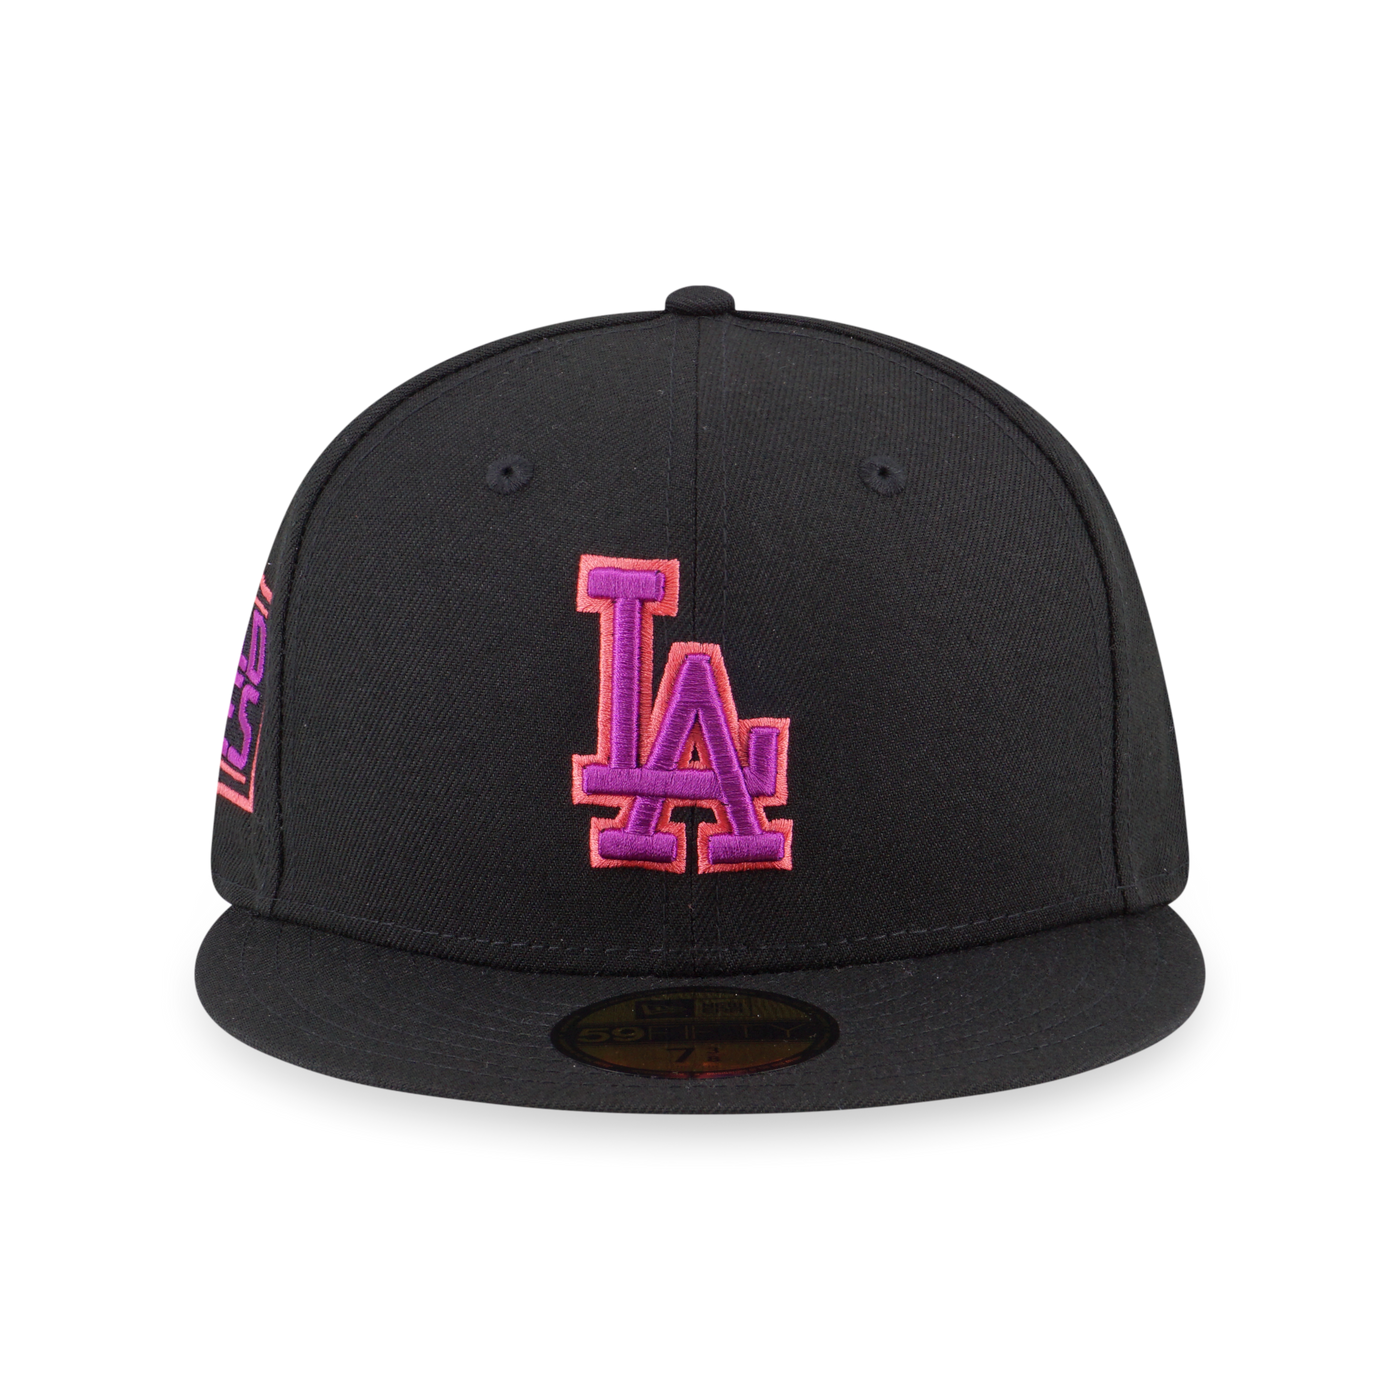 59FIFTY PACK - HALLOWEEN LOS ANGELES DODGERS BLACK 59FIFTY CAP